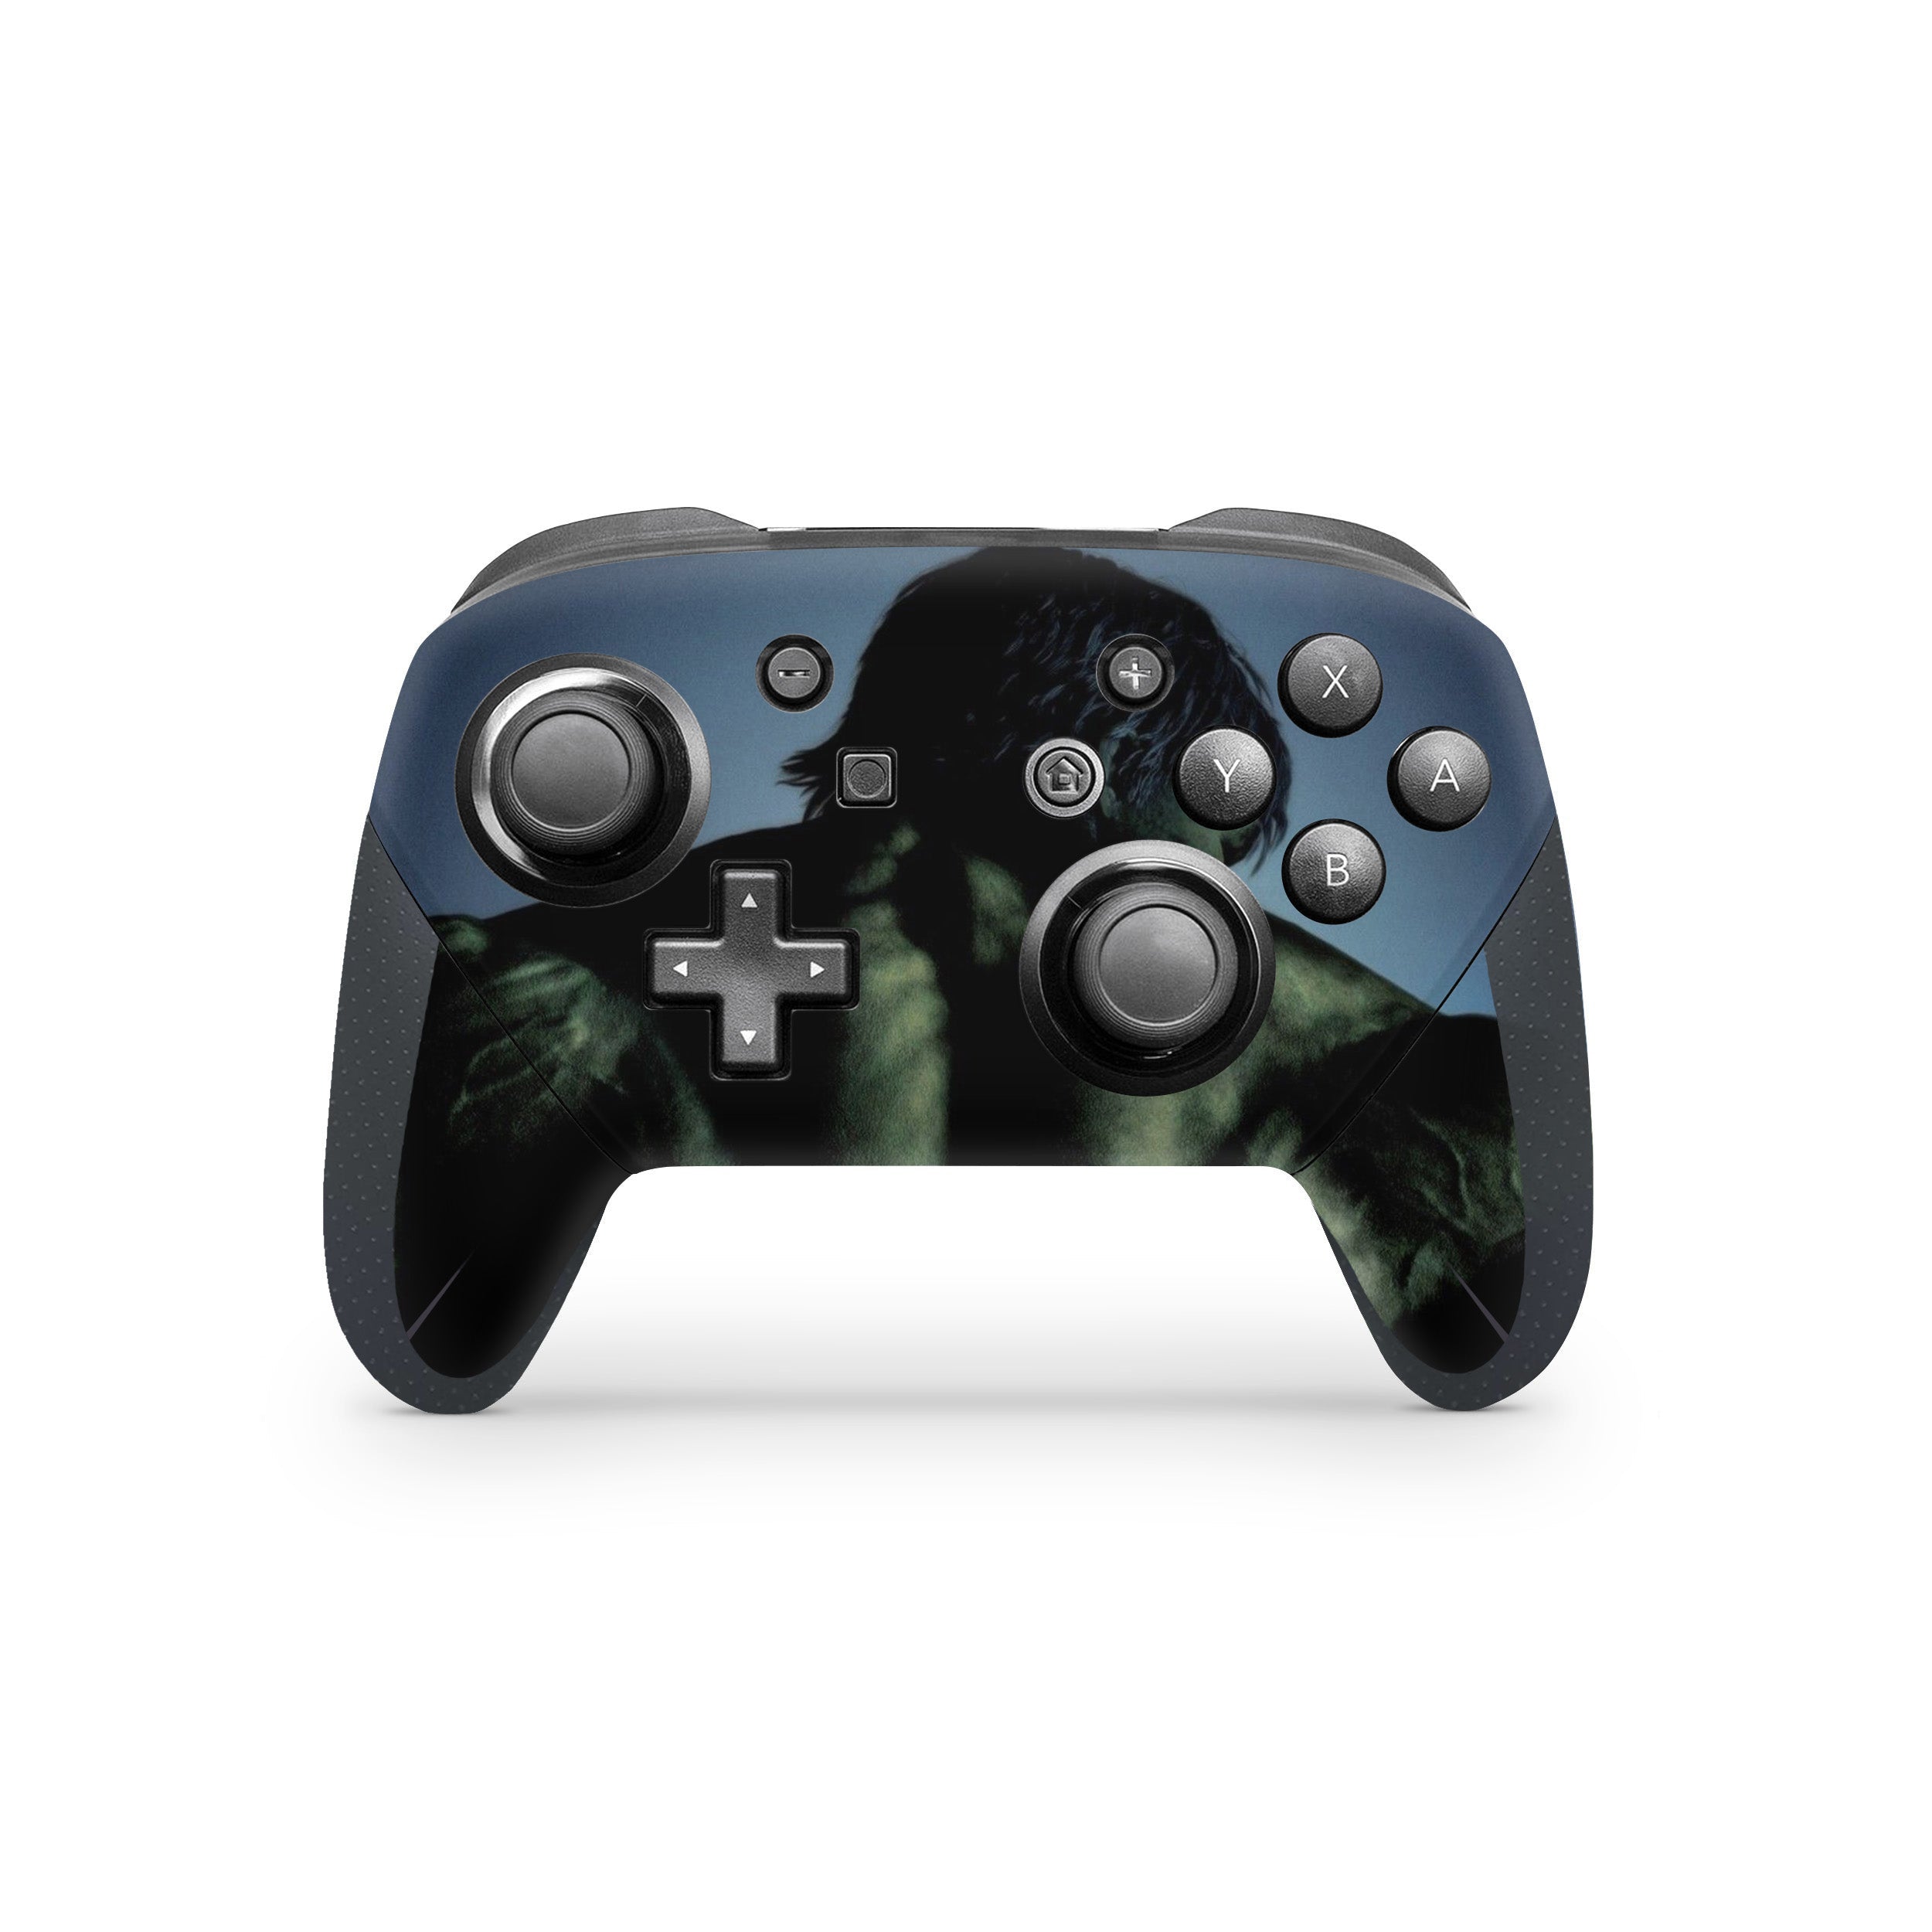 A video game skin featuring a Marvel Hulk design for the Switch Pro Controller.